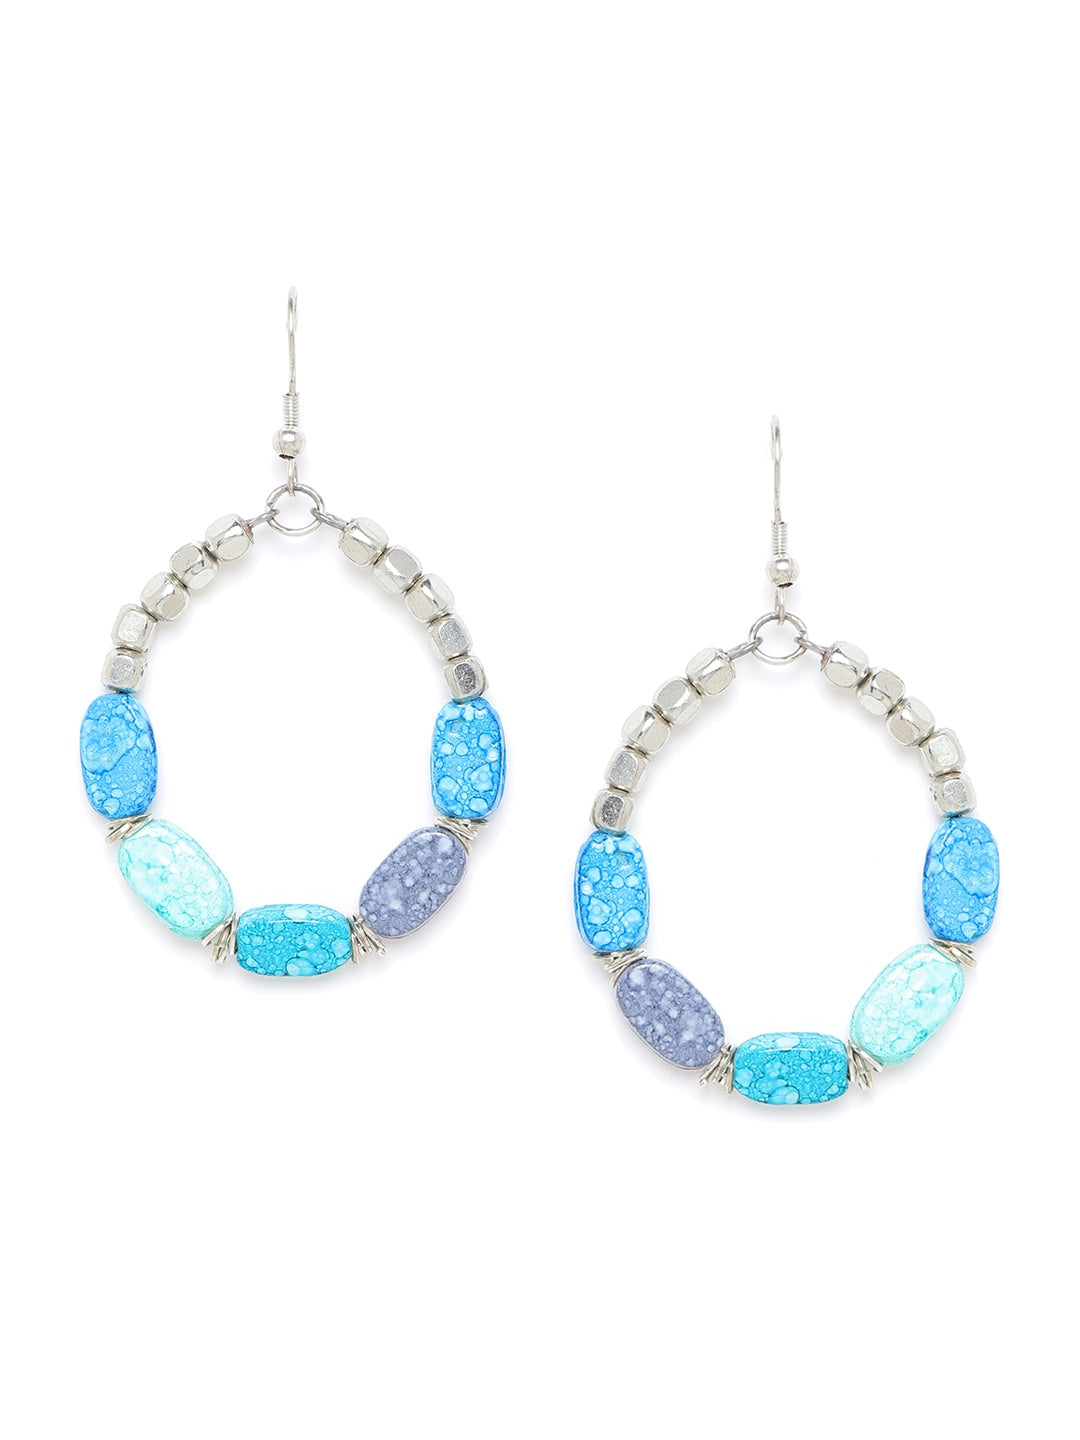 Turquoise Blue Silver-Plated Beaded Oval Drop Earrings